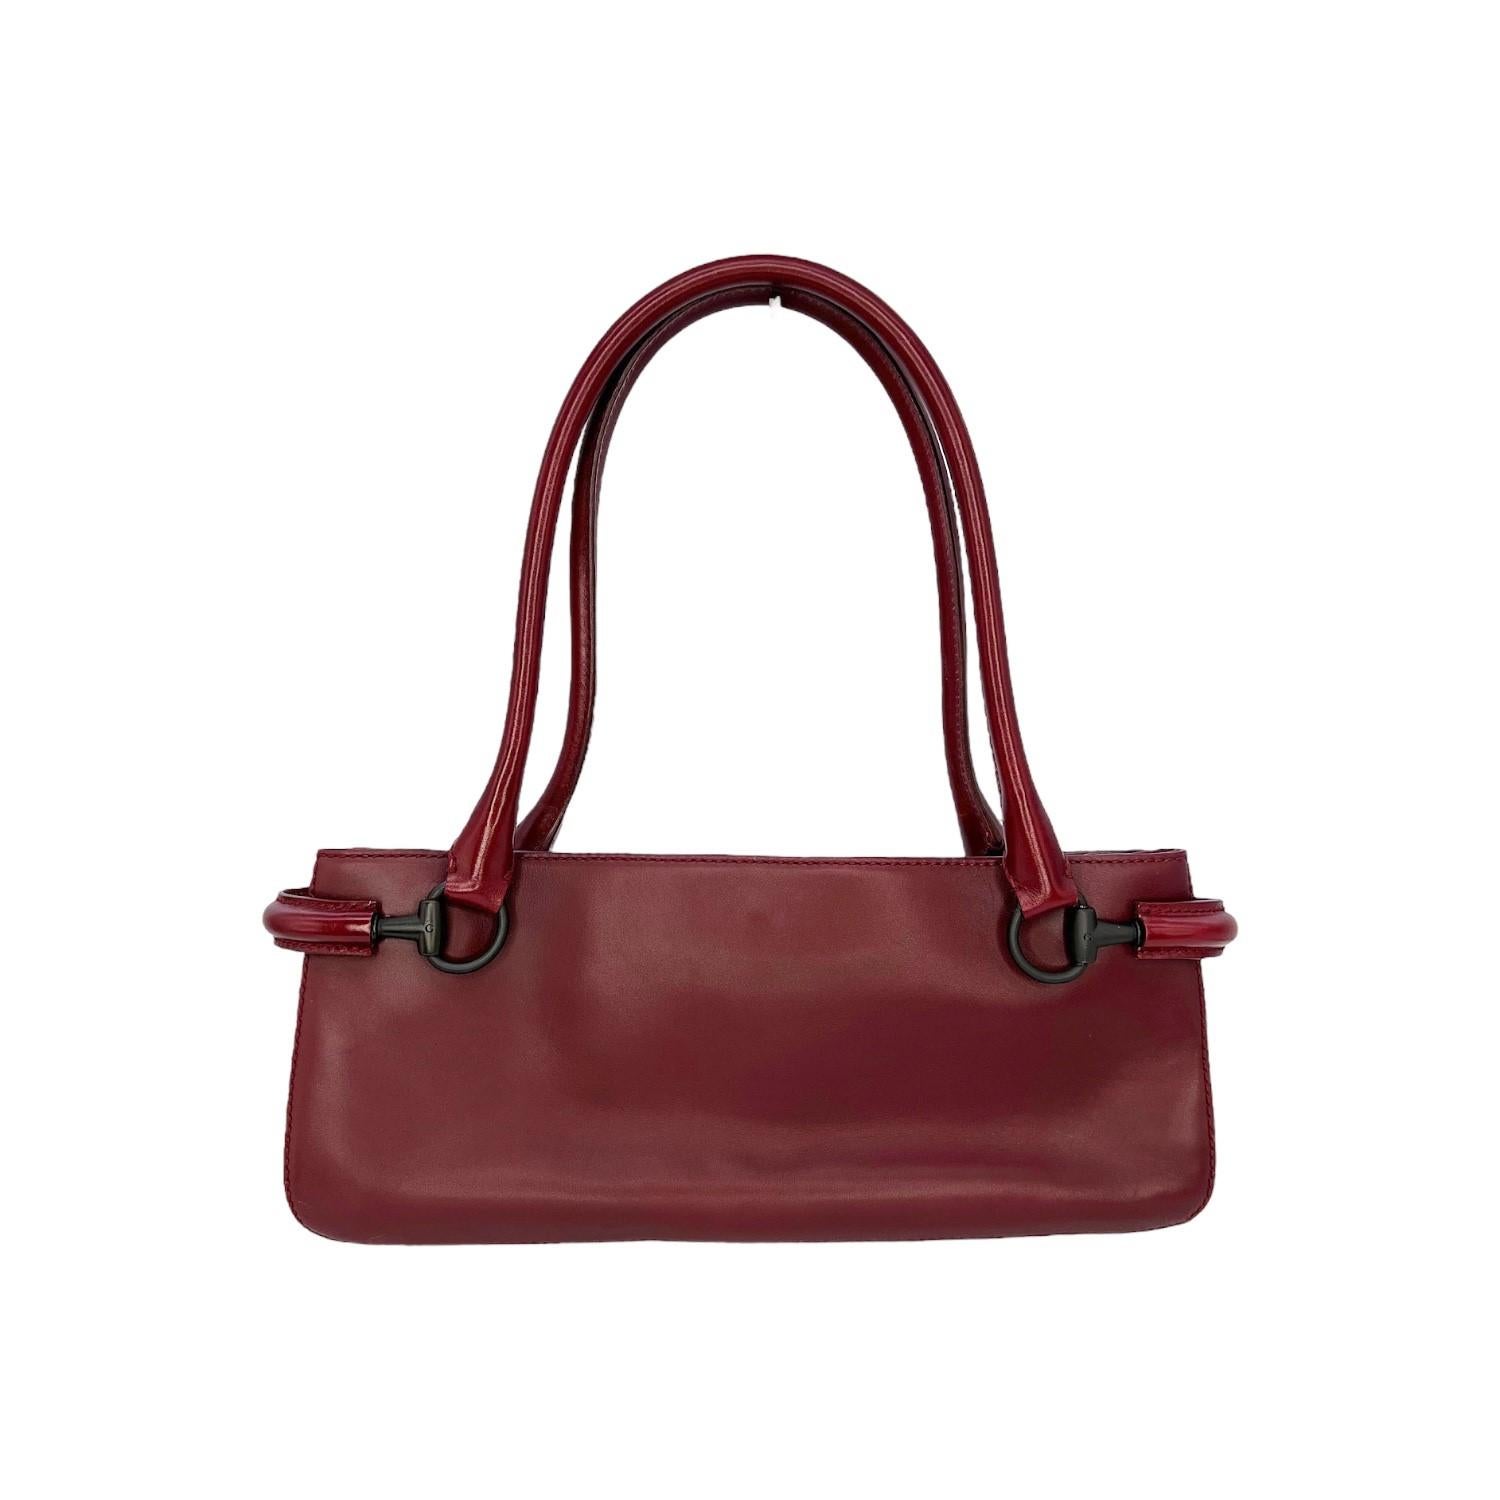 This Gucci Baguette Shoulder Bag is finely crafted of a burgundy leather exterior with matte black hardware features. It has dual rolled leather shoulder straps. It has a magnetic snap closure that opens up to a Gucci jacquard fabric interior with a